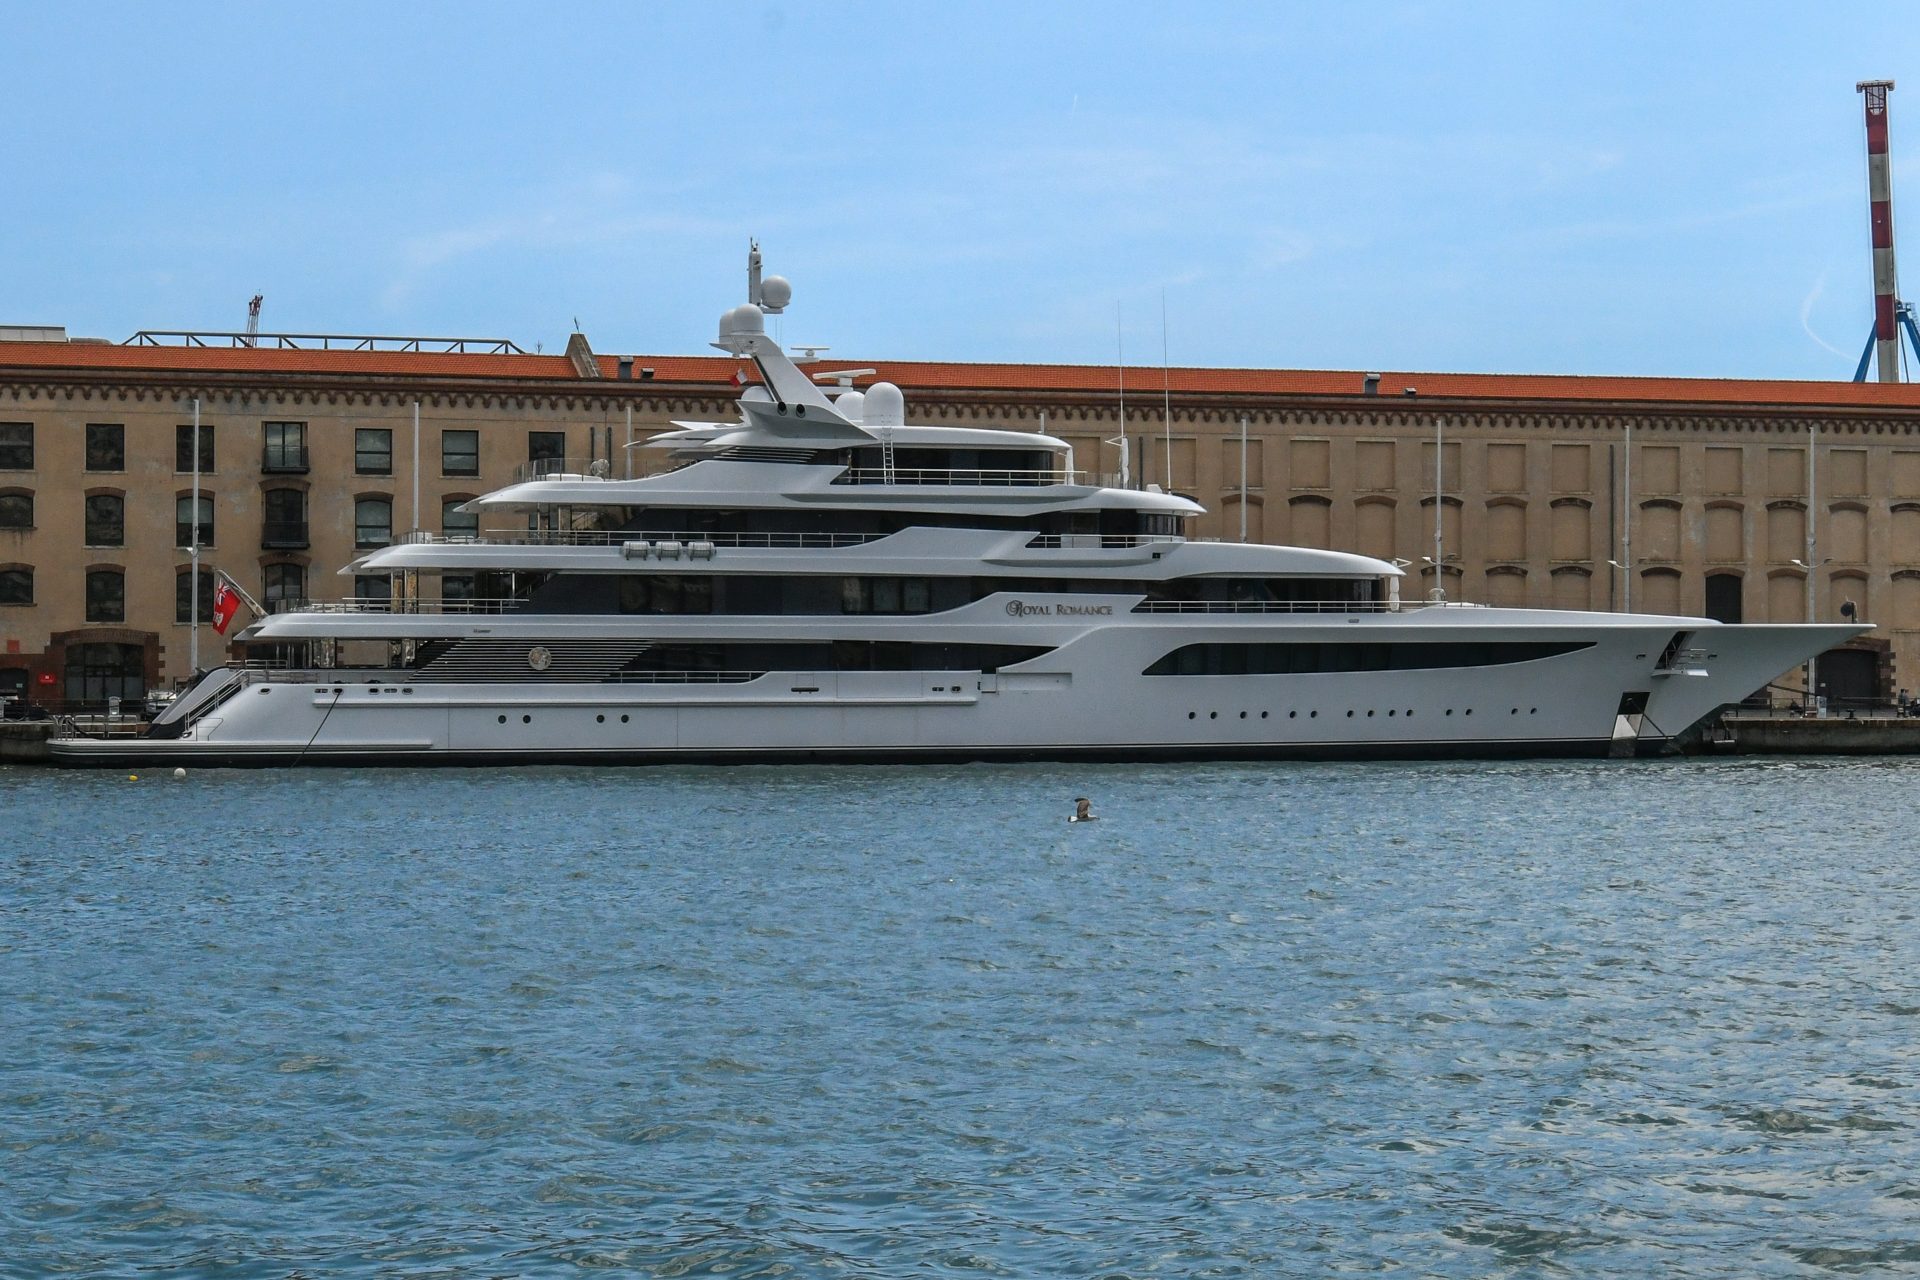 <p><span>Ukraine’s Asset Recovery and Management Agency reported that it has been working tirelessly for ten months to sell Medvedchuk’s yacht. However, no time frame for when the auction of the yacht would take place was given. </span></p> <p>Photo Credit: Wiki Commons By Bernhard Holub, Own Work, CC BY-SA 4.0</p>